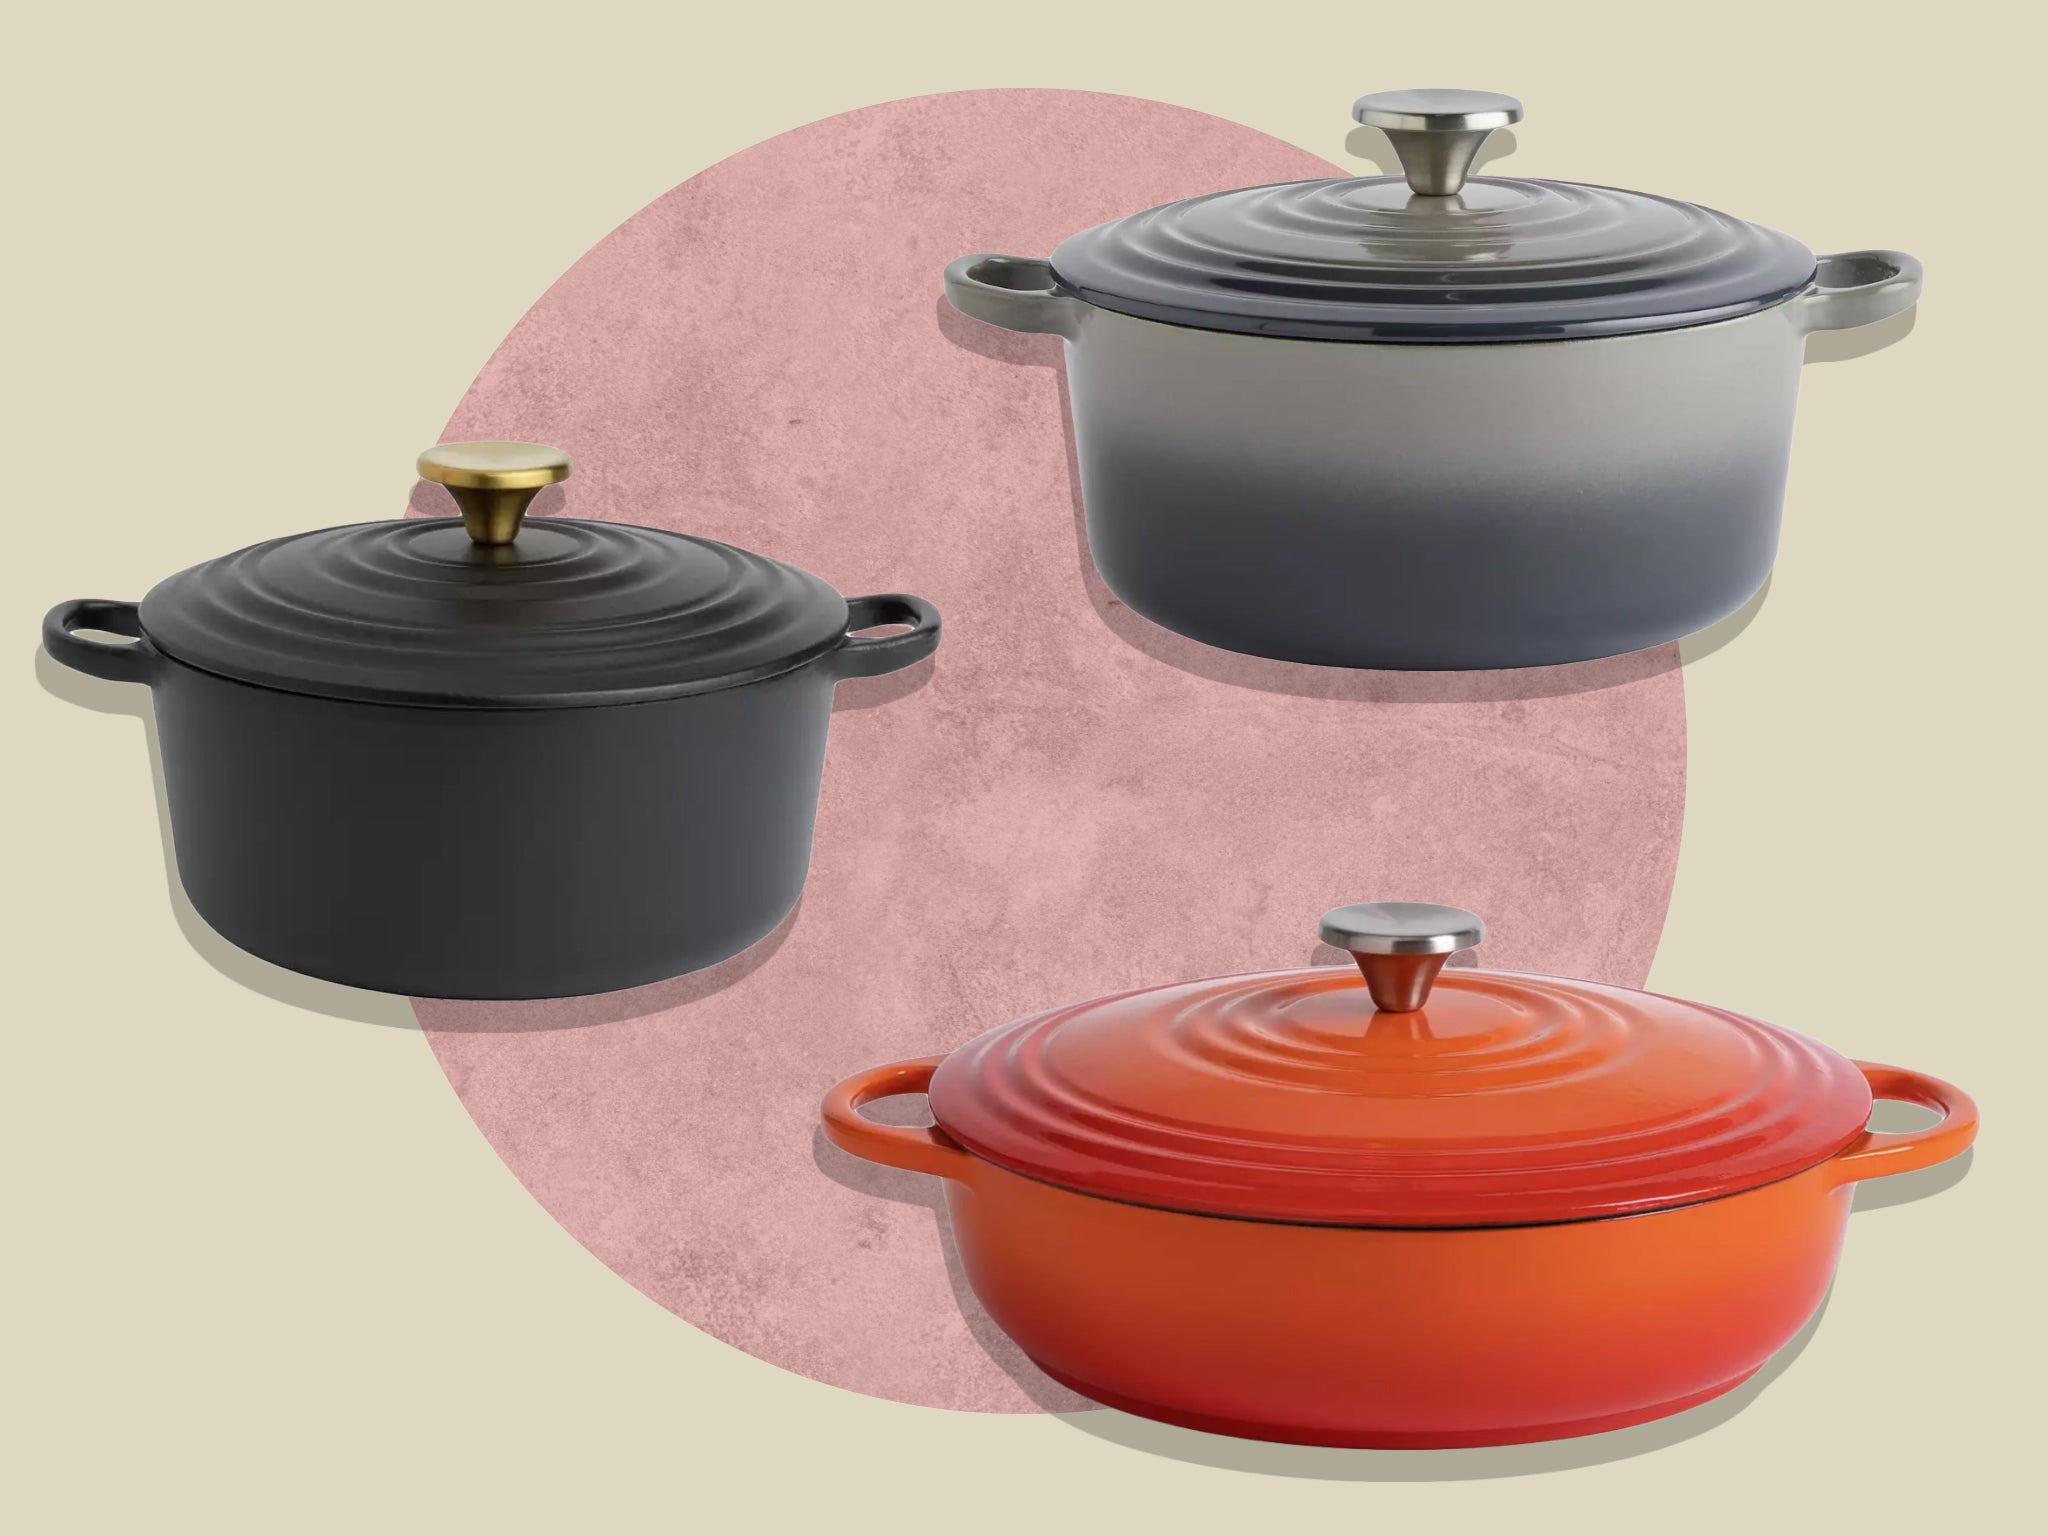 Habitat’s Le Creuset-inspired cast iron cookware is nine times cheaper, and here’s how to buy it